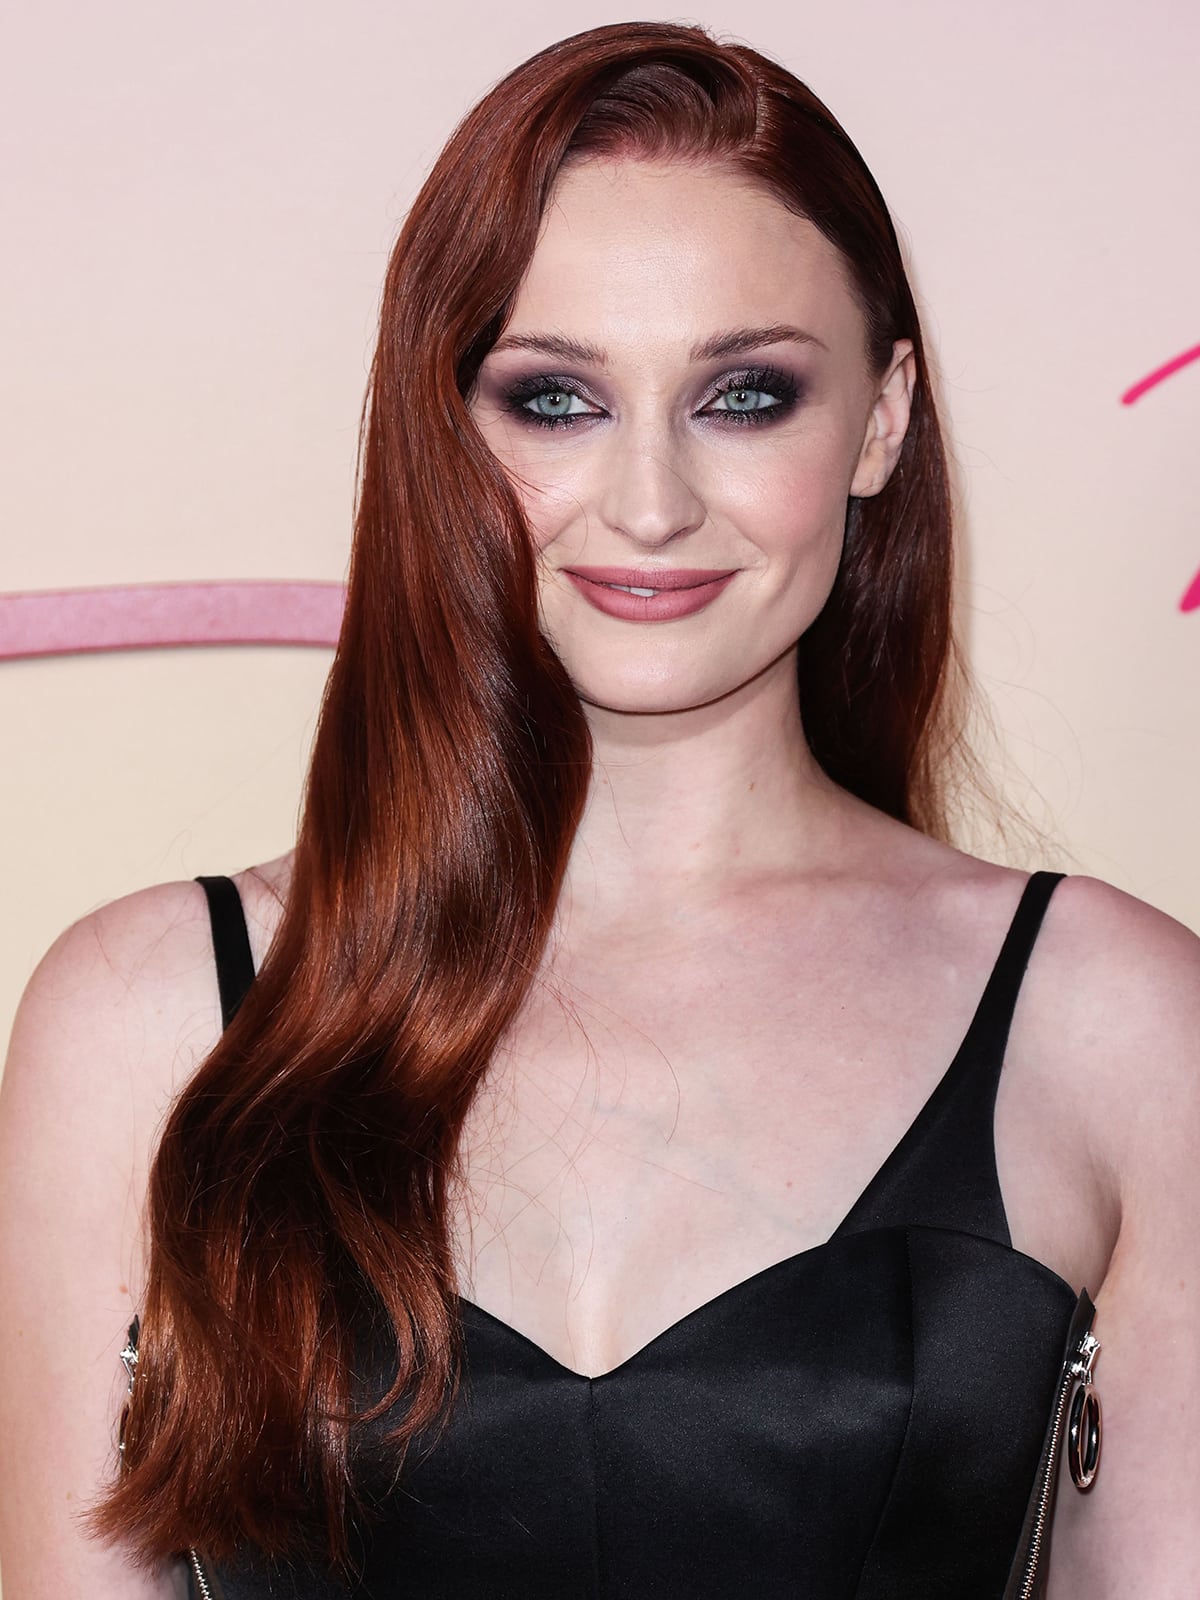 Sophie Turner creates a vampy look with smokey eyeshadow and long wavy red tresses